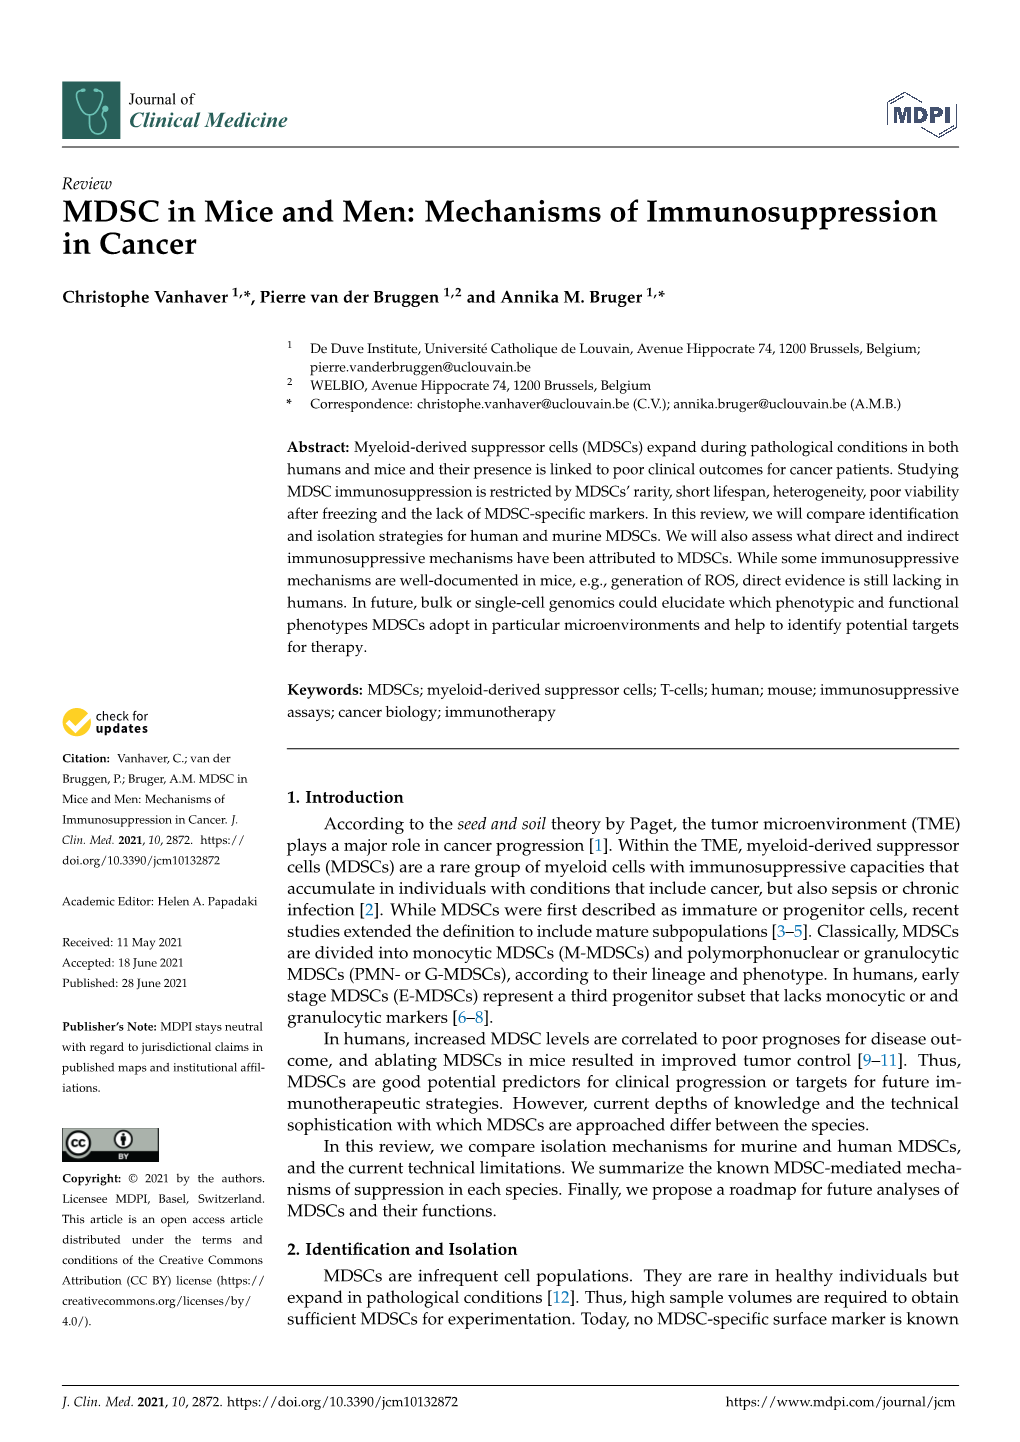 MDSC in Mice and Men: Mechanisms of Immunosuppression in Cancer